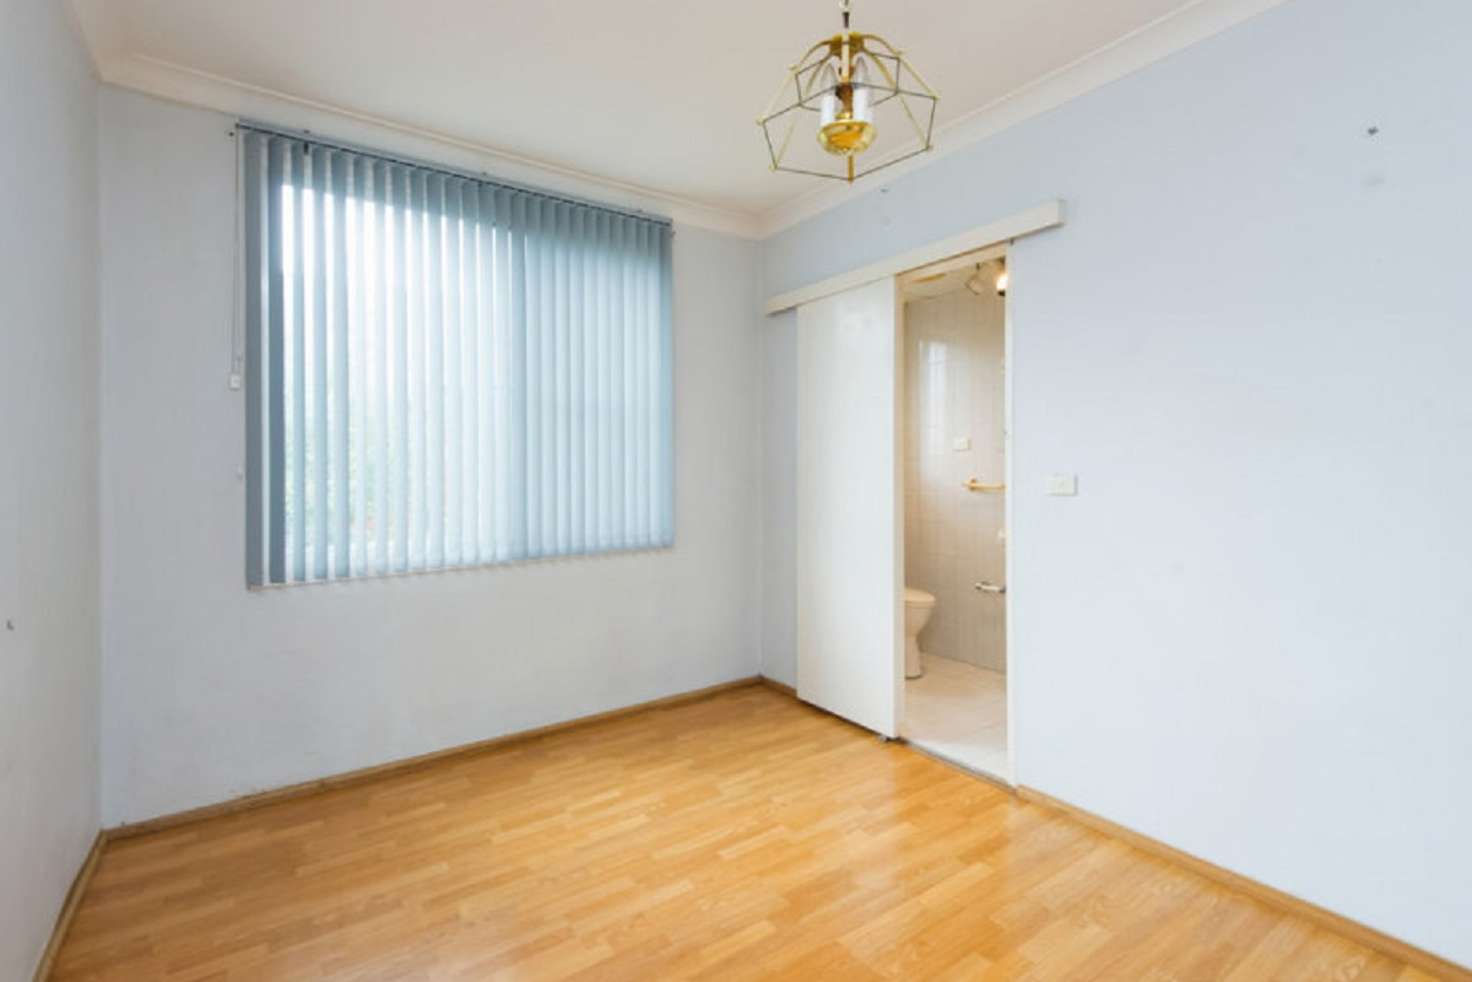 Main view of Homely unit listing, 6/280 Penshurst Street, Willoughby NSW 2068